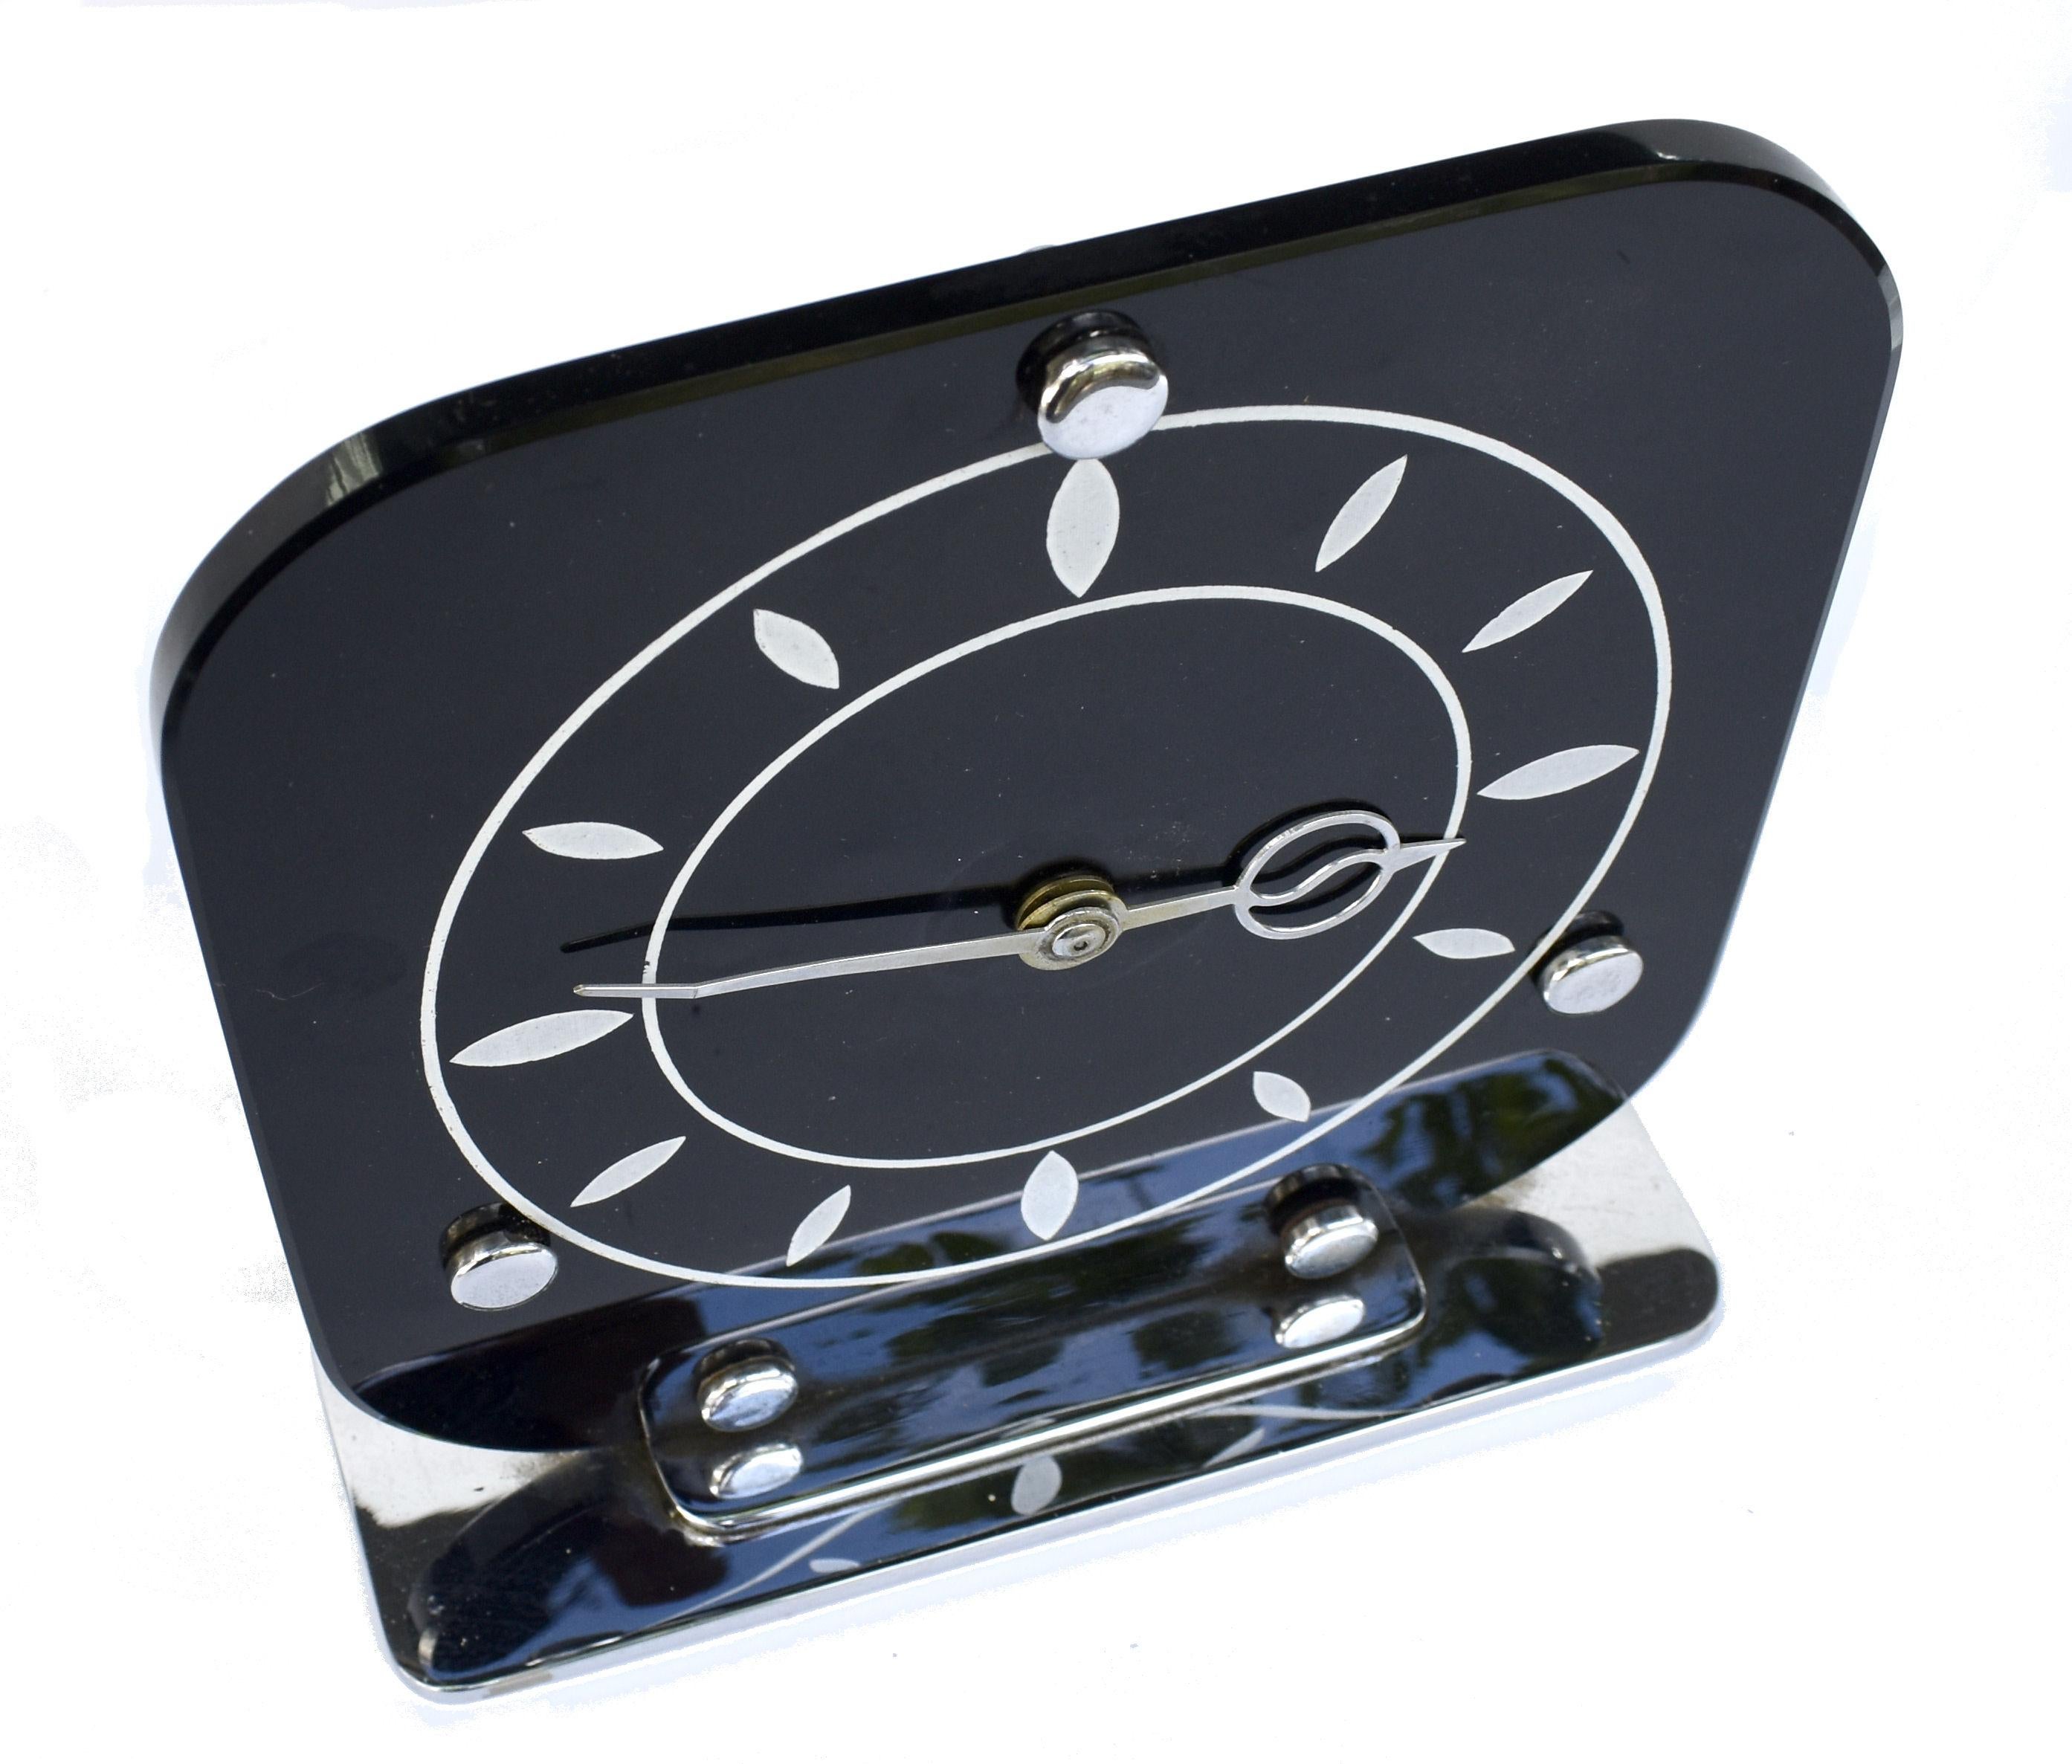 For your consideration is this fabulous 1930's Art Deco English Mantle clock with a superb modernist feel. Jet black vitrolite ( compressed glass ) more often used in Deco bathrooms for splash backs or panelling if you have ever seen those, which